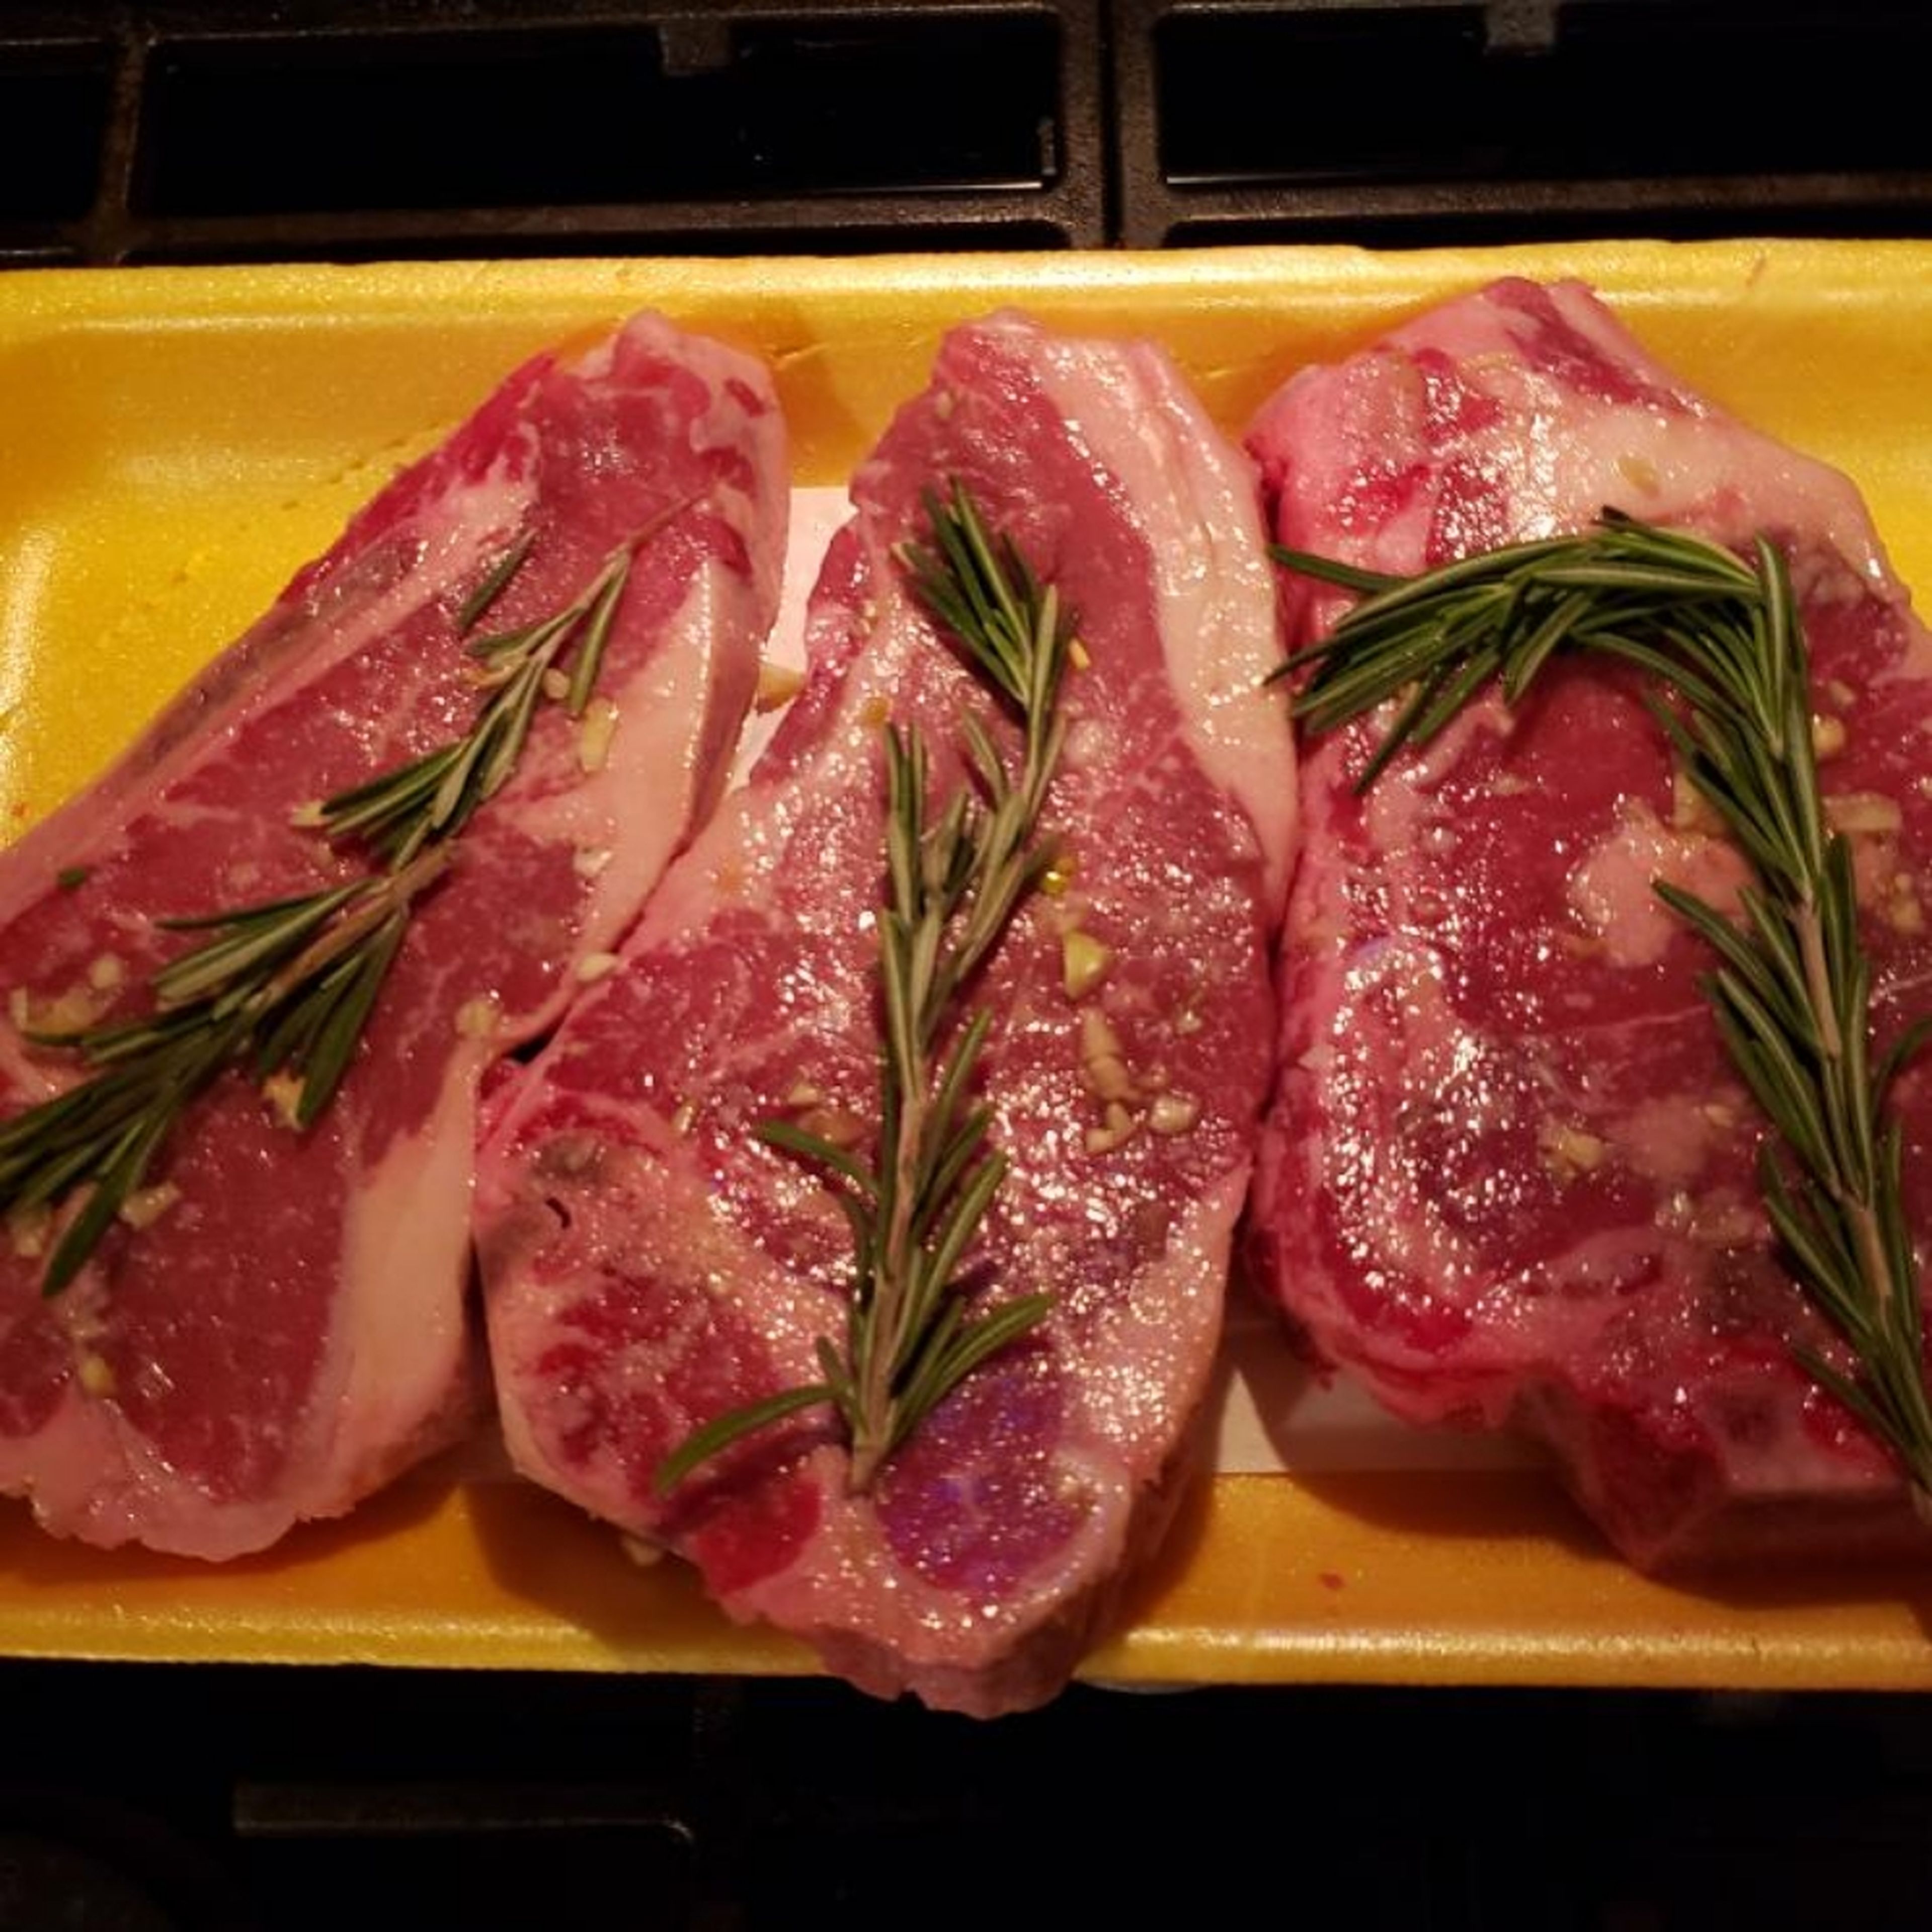 Mince garlic and fresh rosemary. Coat steaks in a thin coat of olive oil. Season with salt and pepper to taste. Spread some of the minced garlic and rosemary on both sides. Place mushrooms on foil, coat in olive oil, salt, pepper and garlic and rosemary. Wash Shishitos and coat in olive oil and garlic.